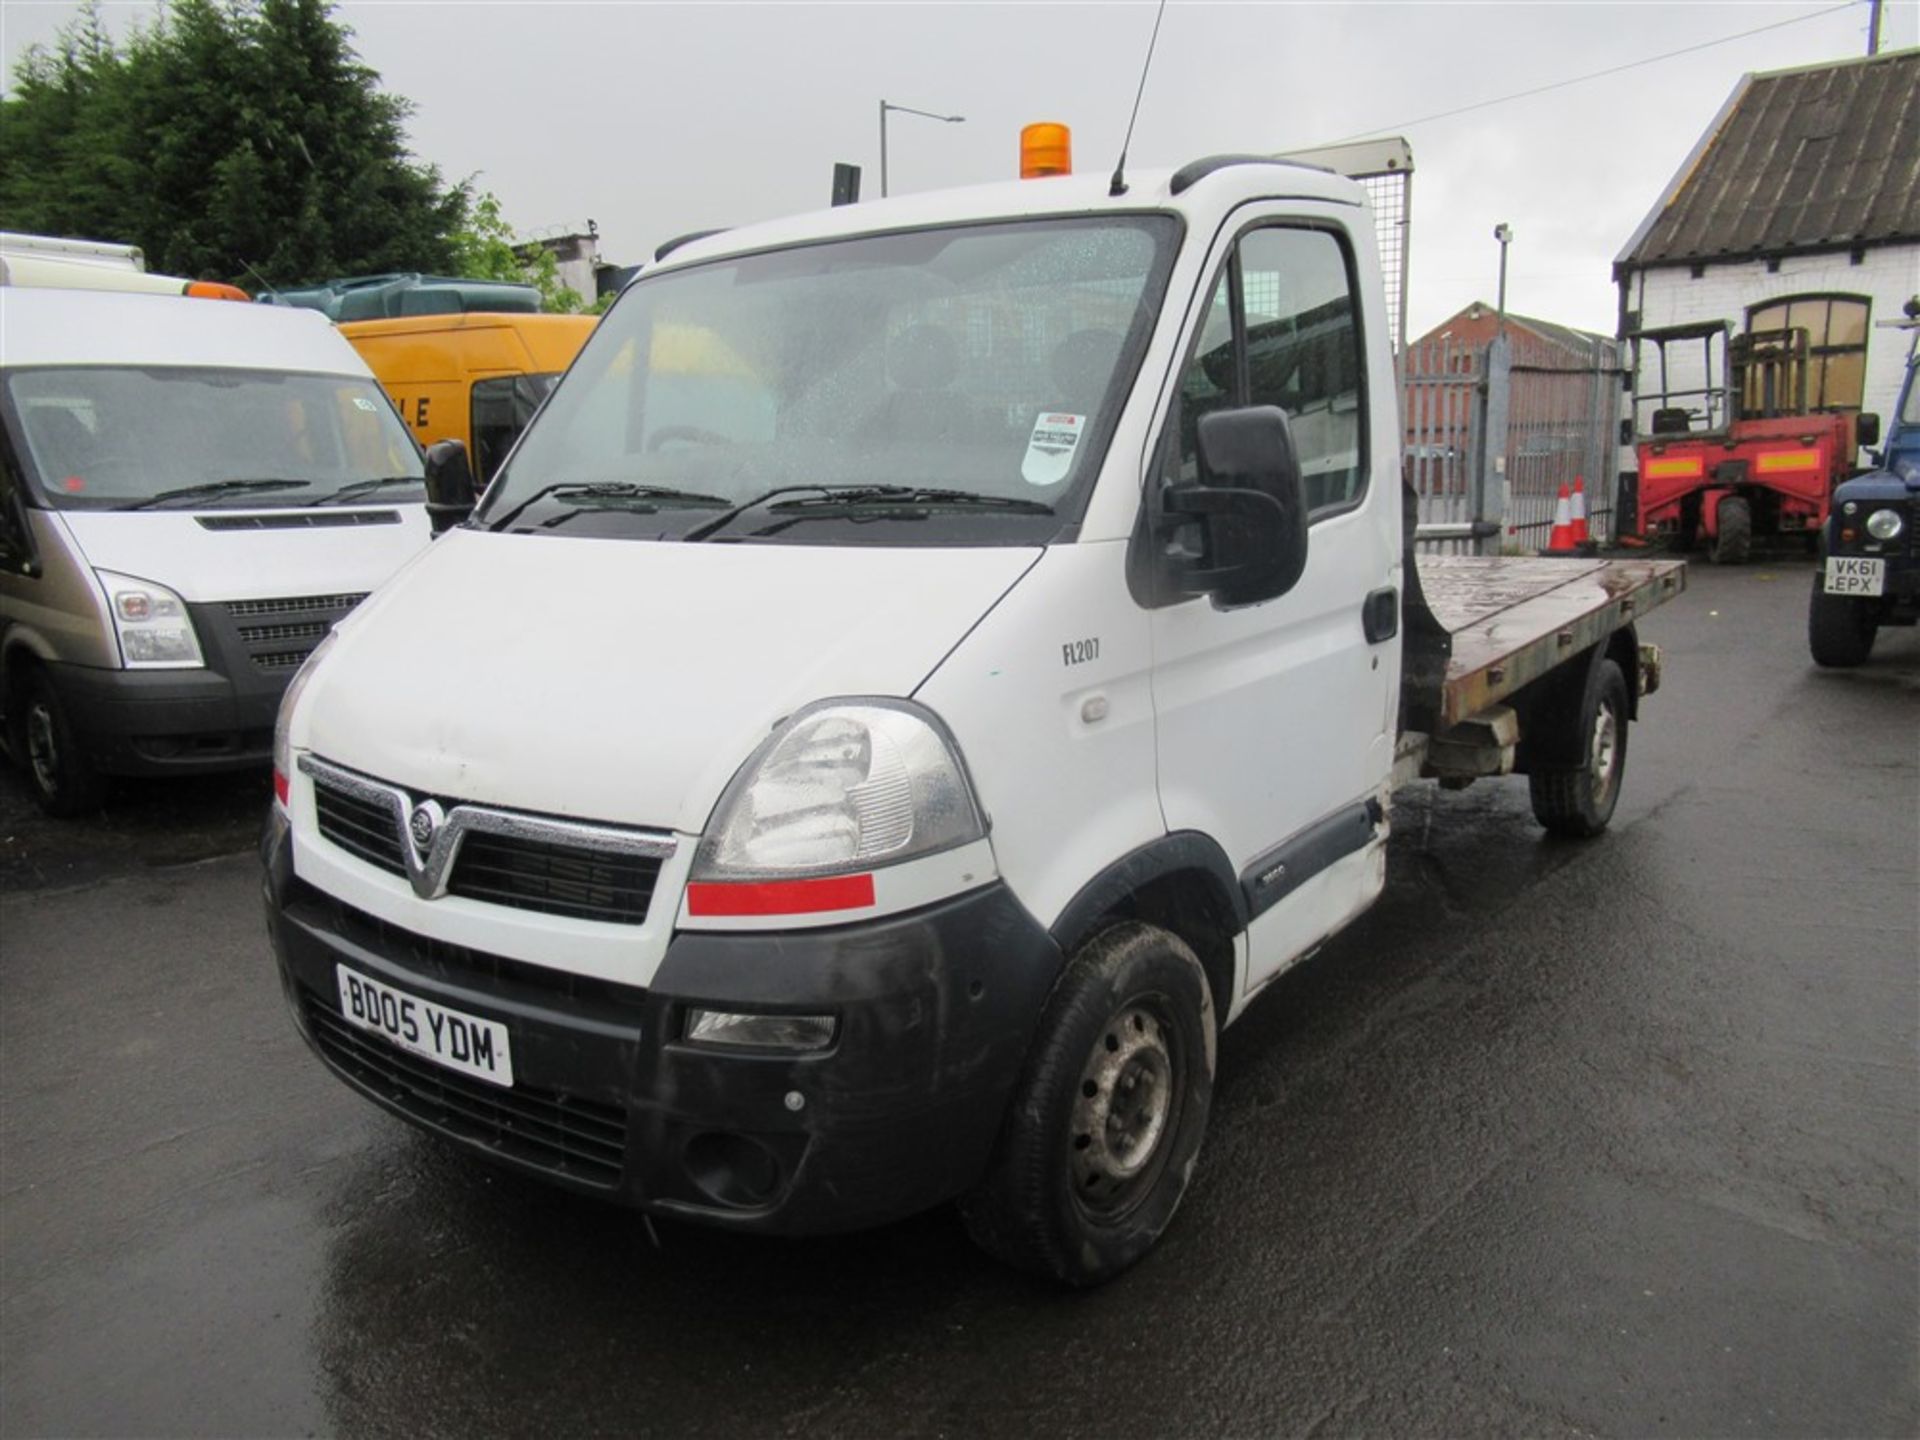 05 reg VAUXHALL MOVANO 3500 CDTI MWB TIPPER, 1ST REG 06/05, 69300M WARRANTED, V5 HERE, 1 OWNER - Image 2 of 5